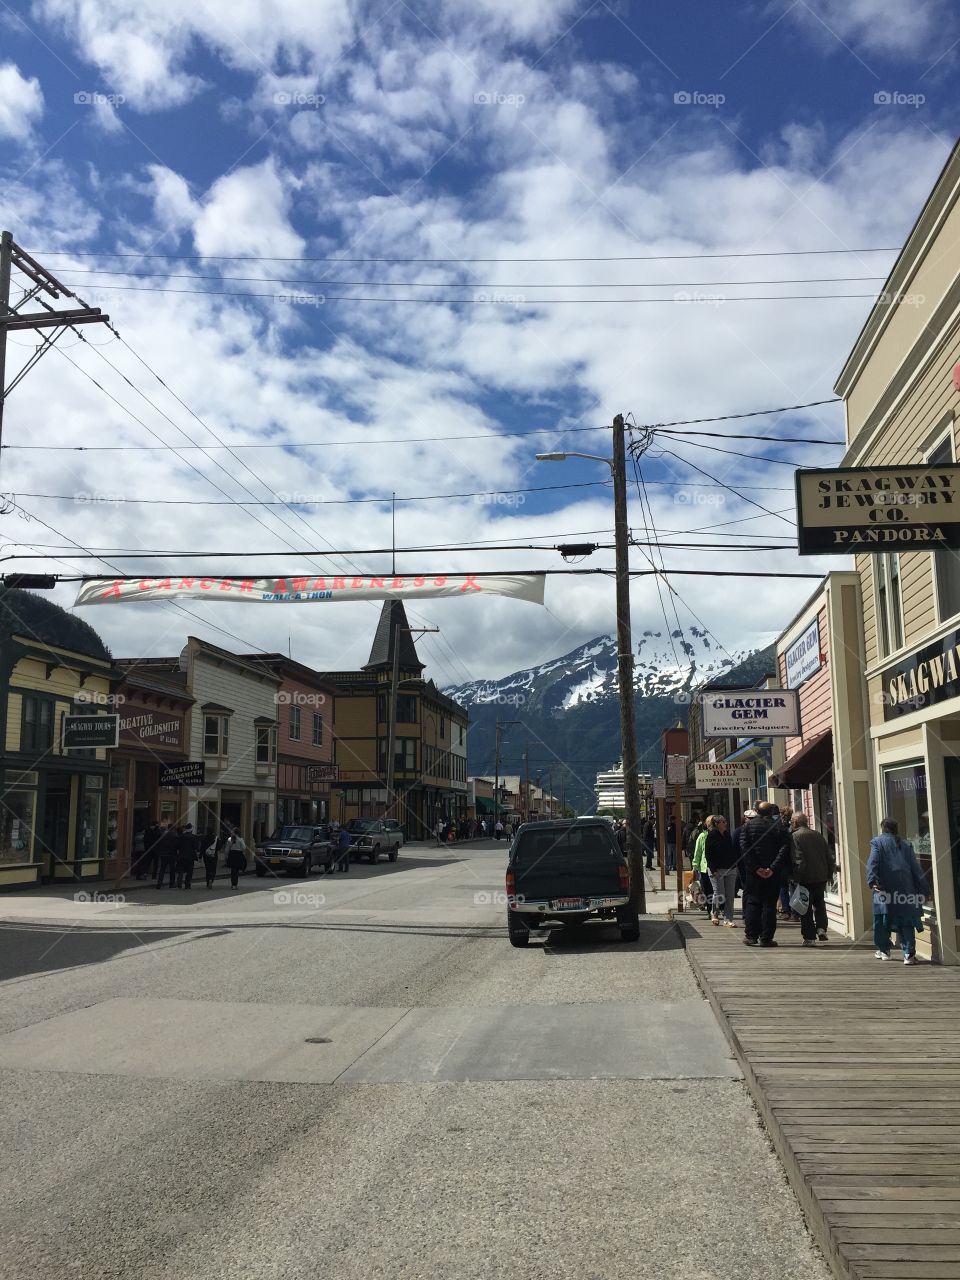 The quiet streets of Skagway